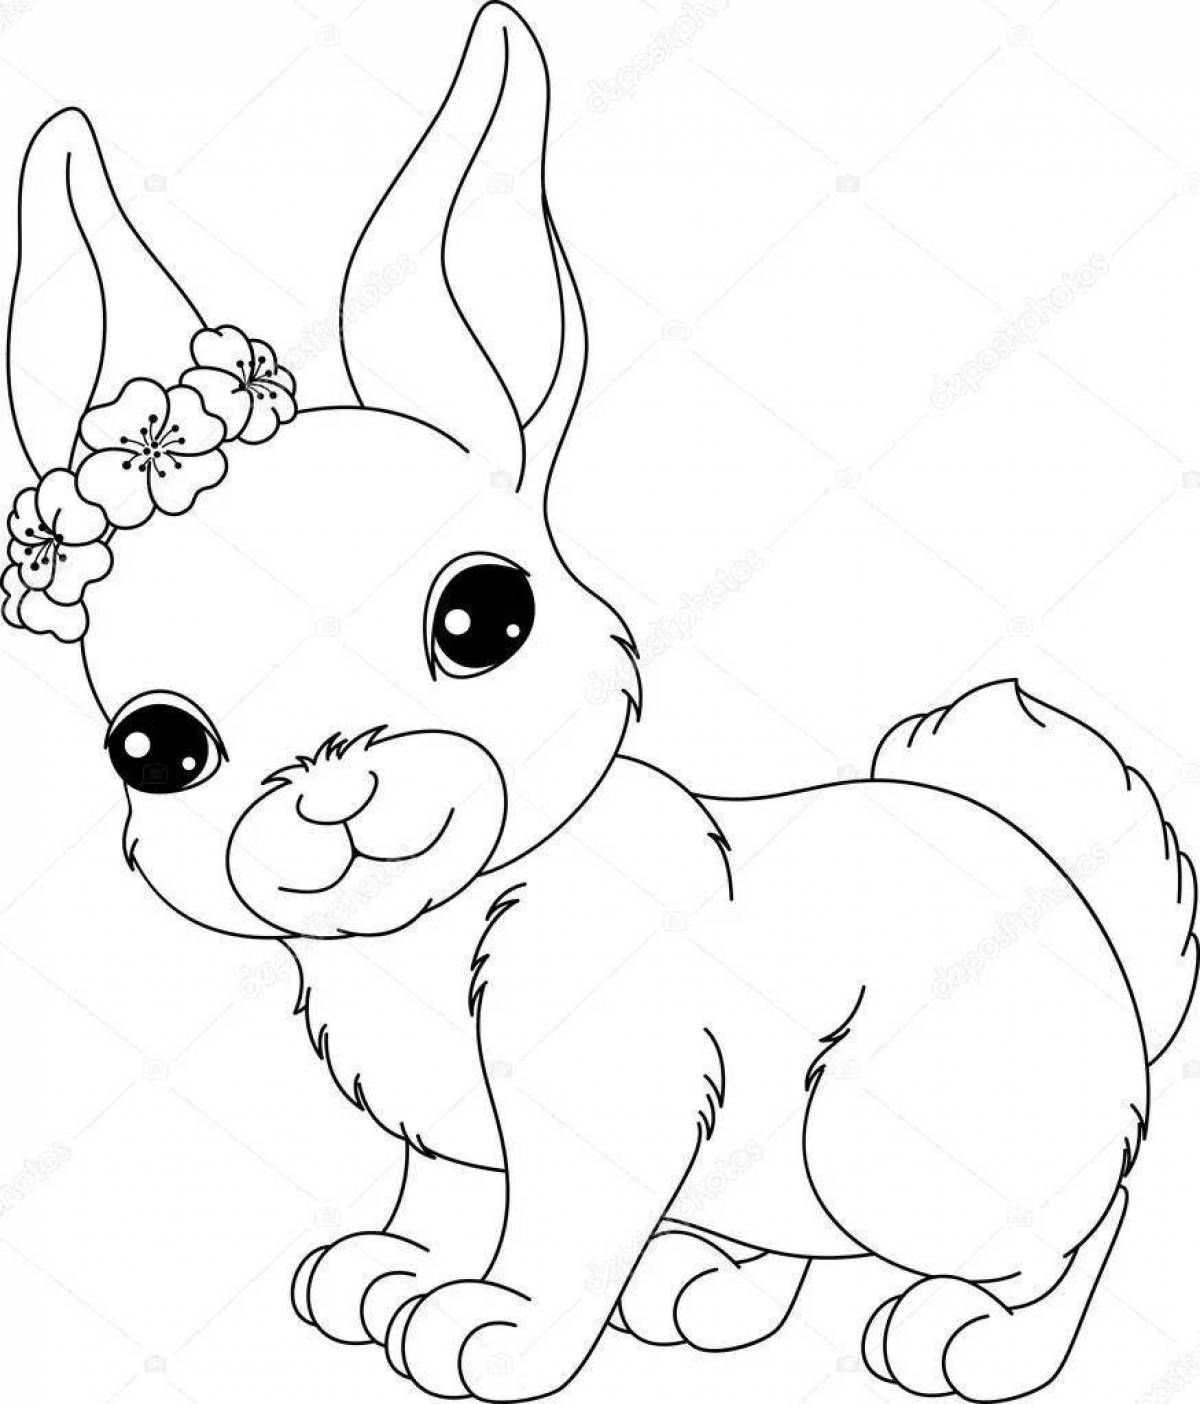 Naughty cat and rabbit coloring page